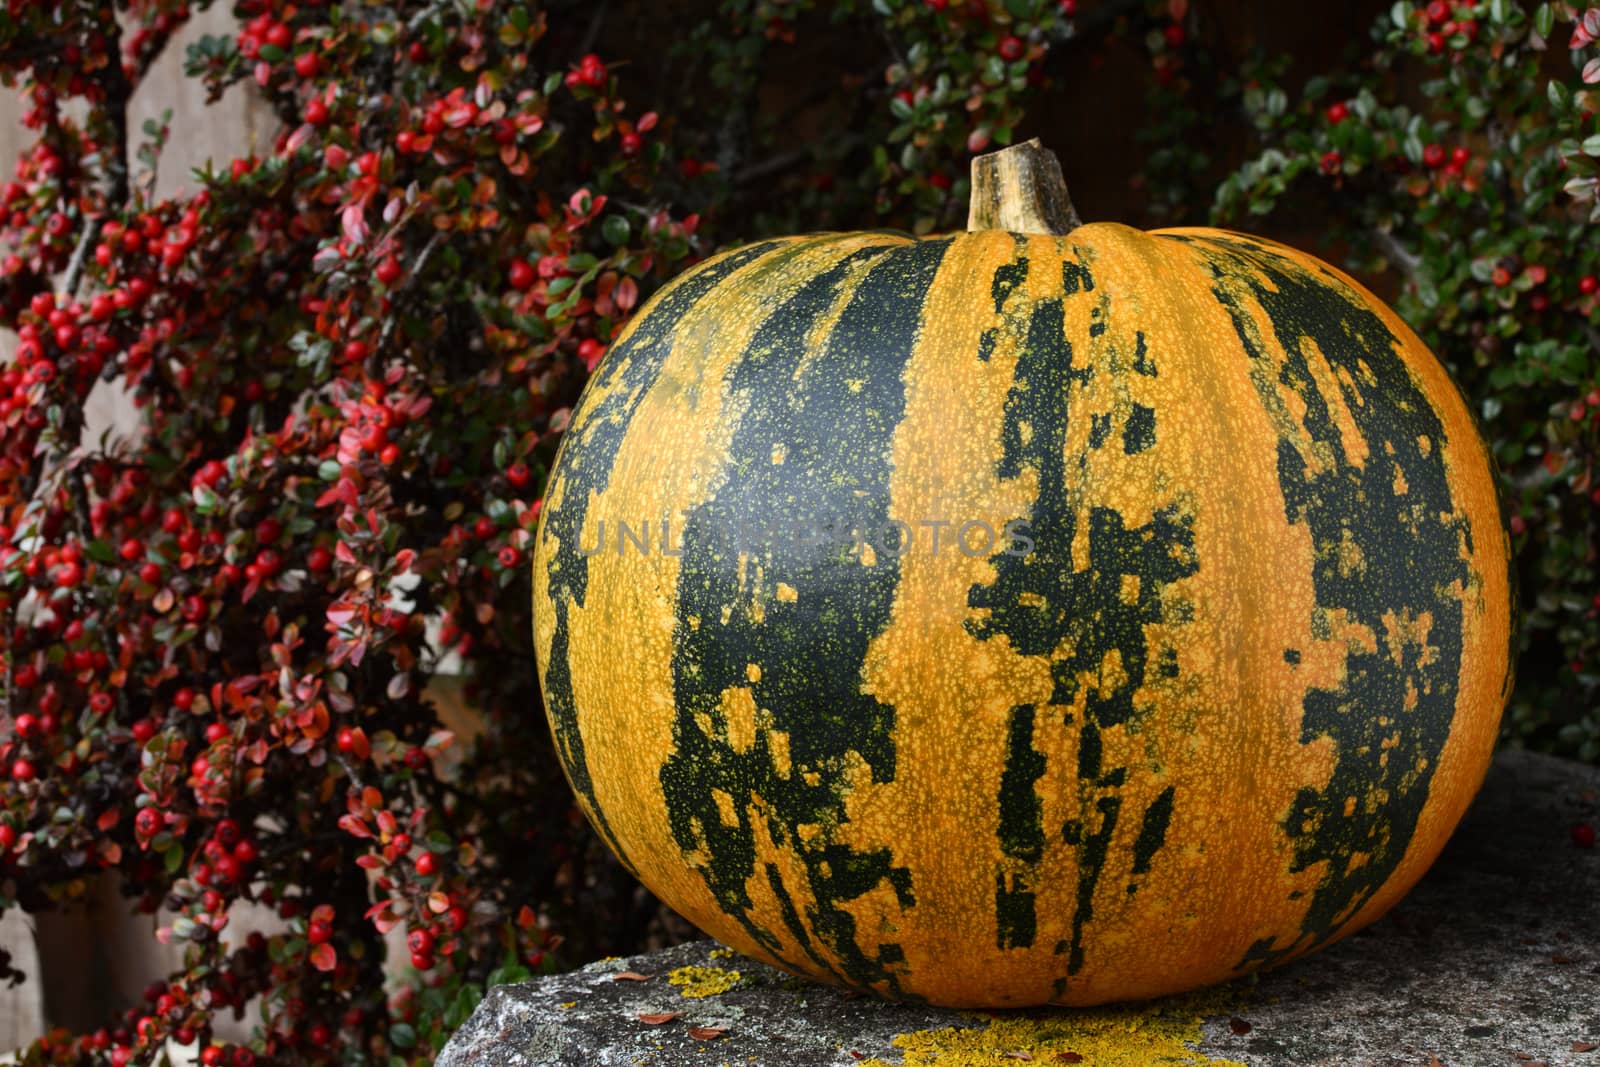 Large pumpkin with stripes, surrounded by fall berries by sarahdoow